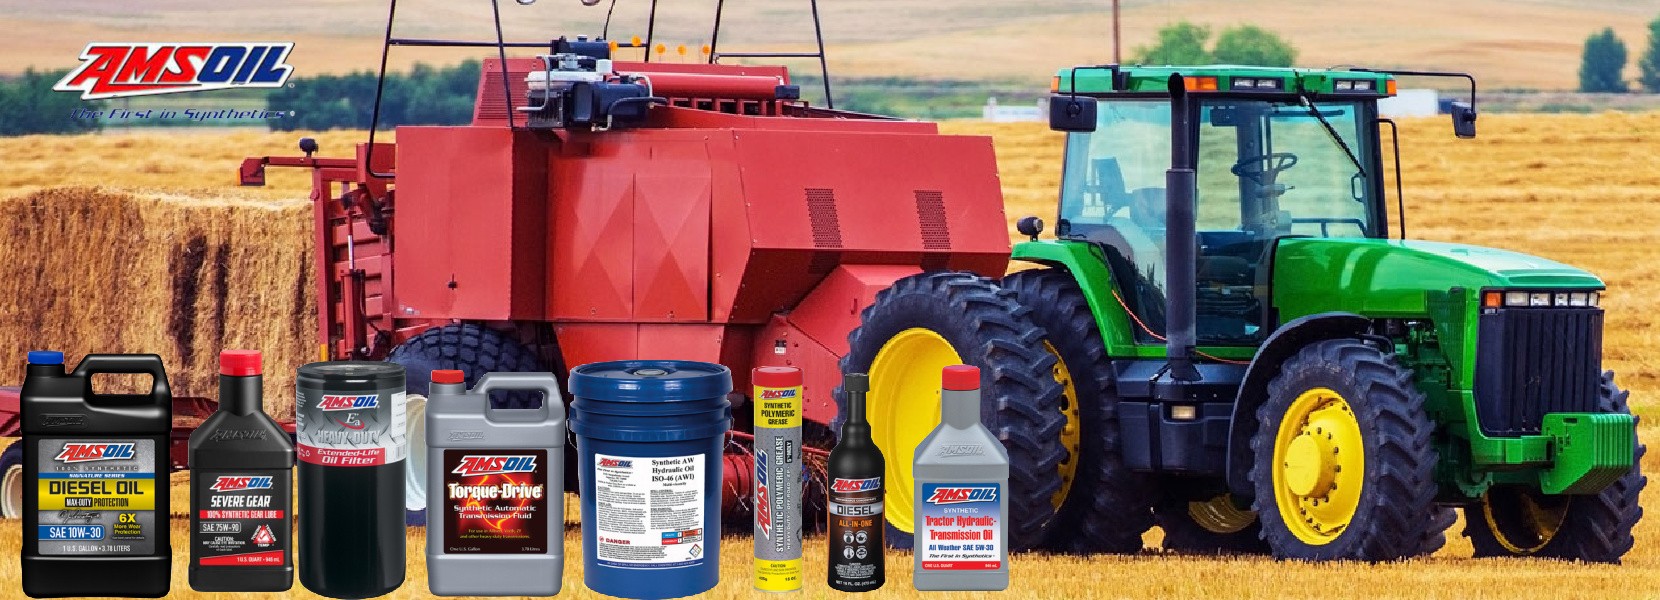 AMSOIL Agriculture Lubricants